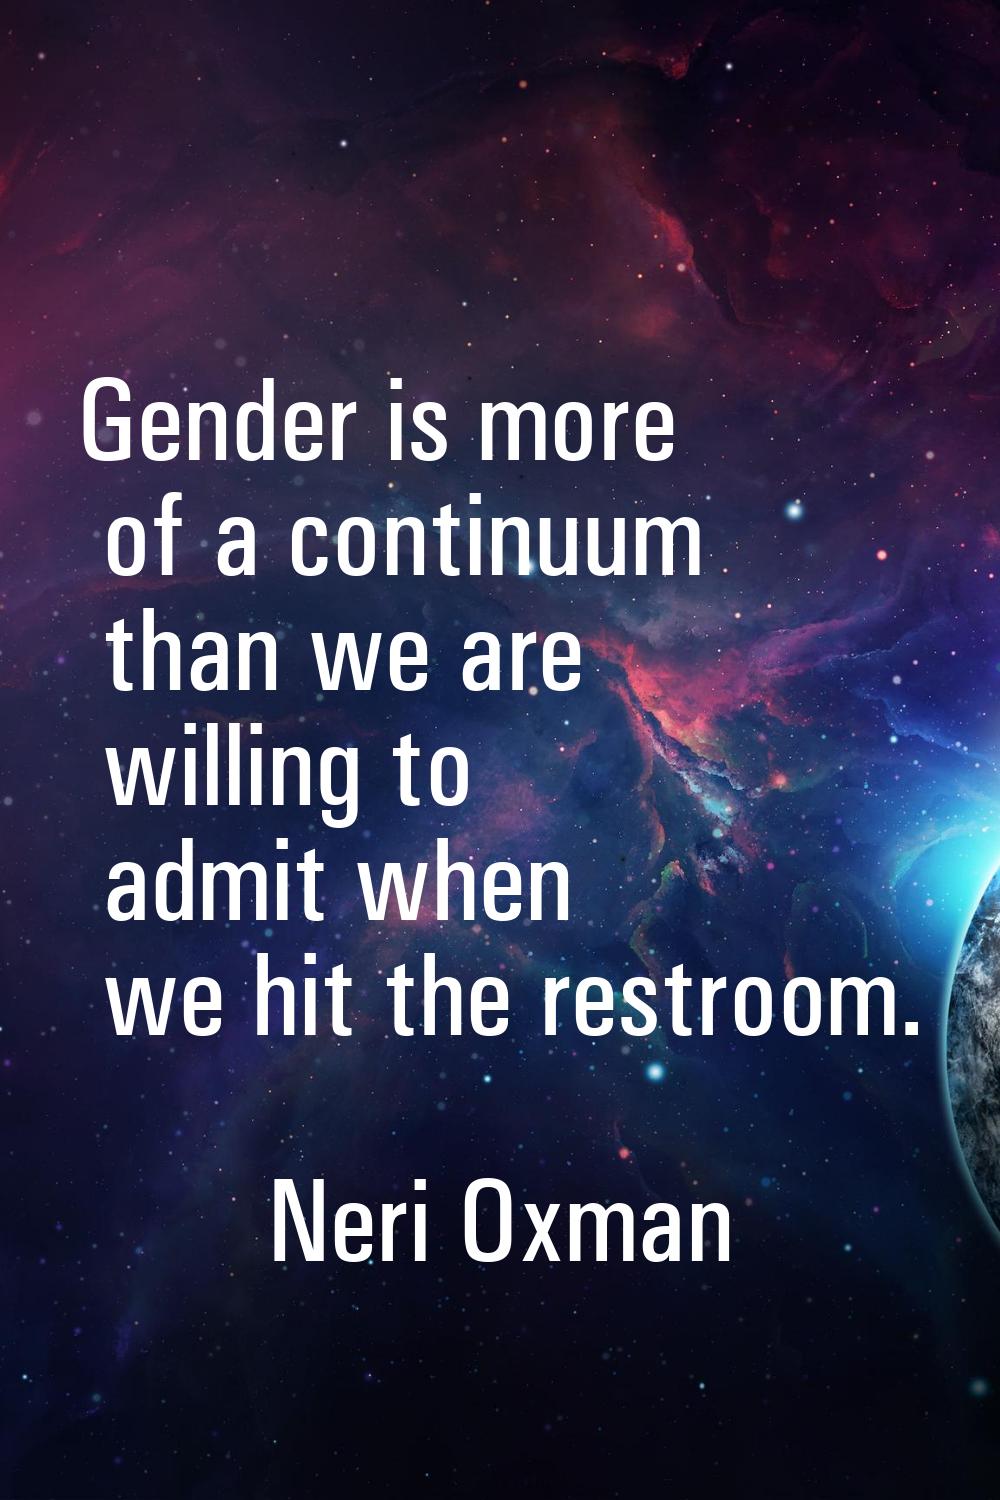 Gender is more of a continuum than we are willing to admit when we hit the restroom.